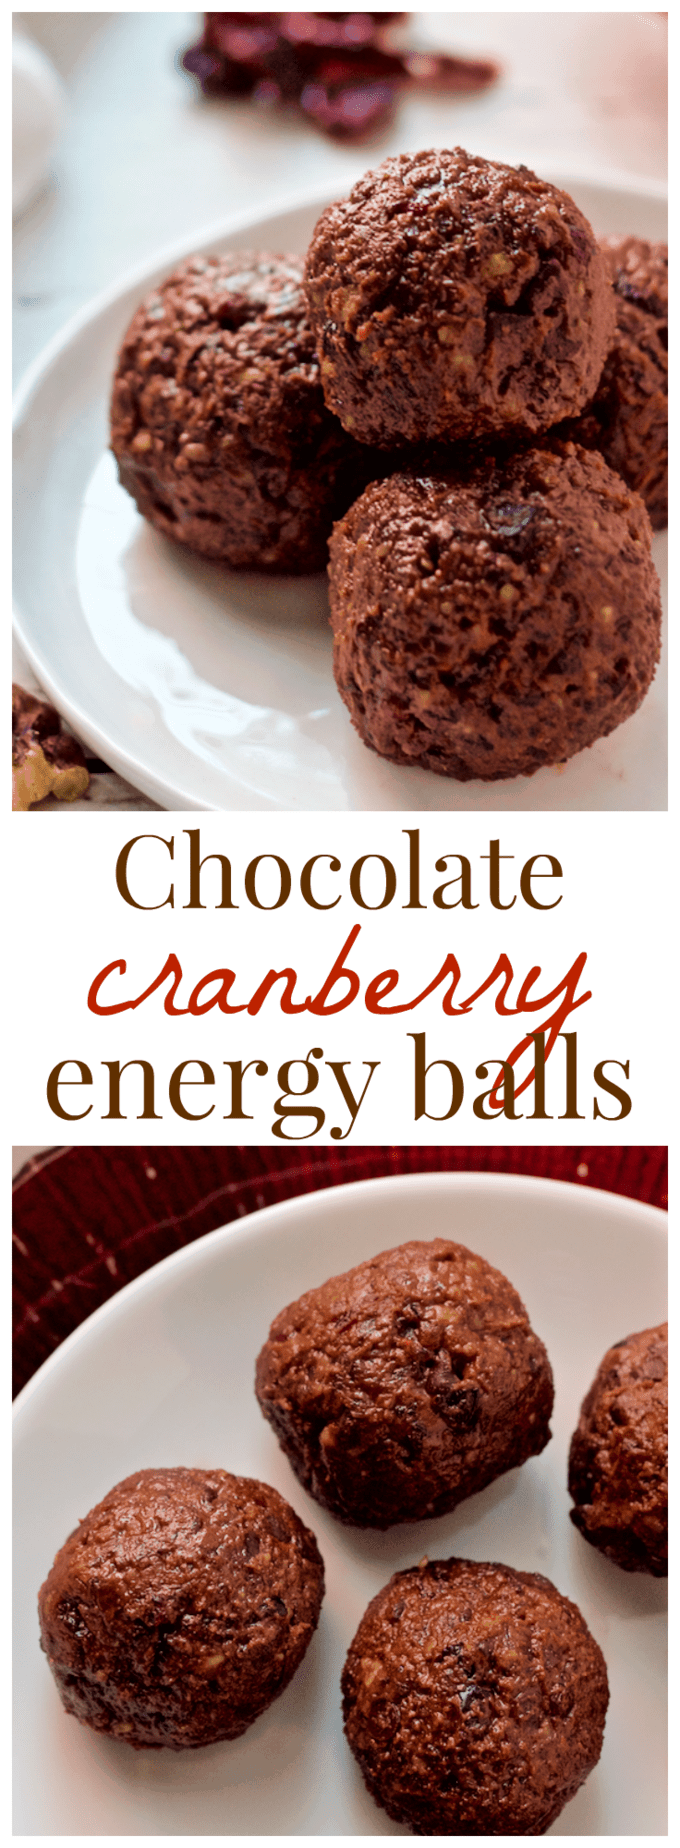 Chocolate cranberry energy balls - just 5 ingredients to make this delicious pick-me-up snack! | FamilyFoodontheTable.com